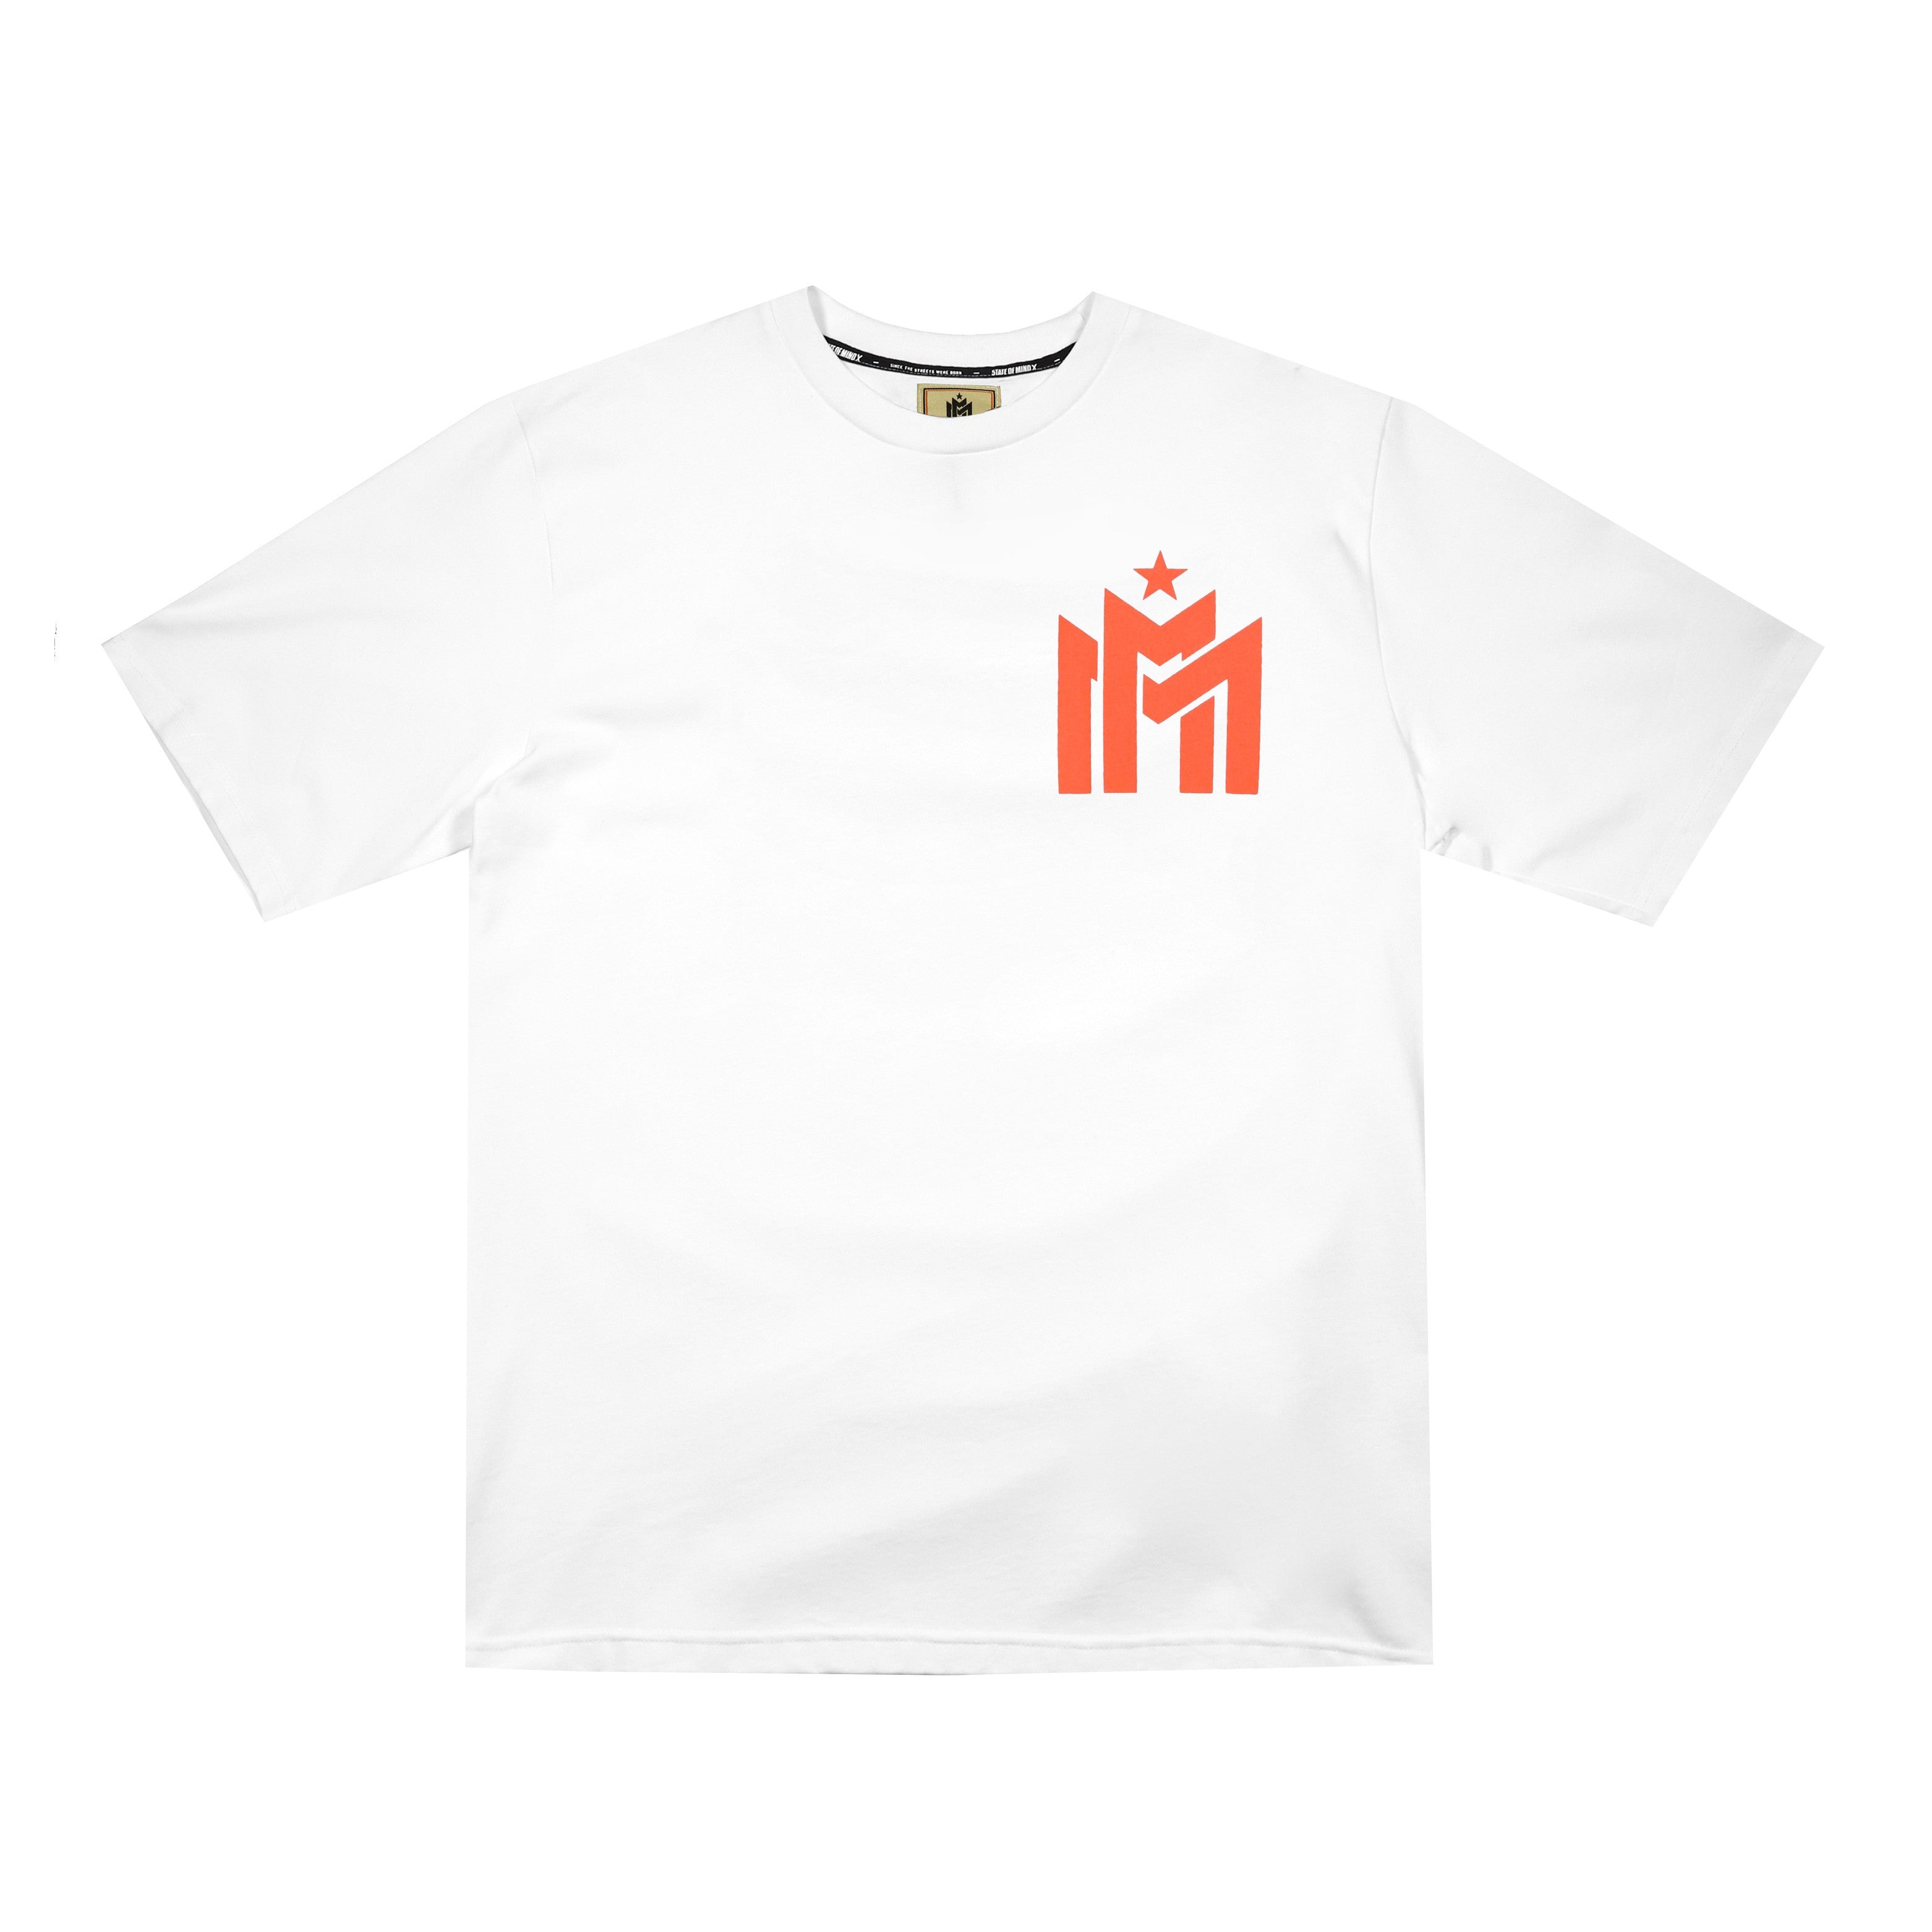 Emme-i Miracles Tee X Gue' White Men's T-Shirt